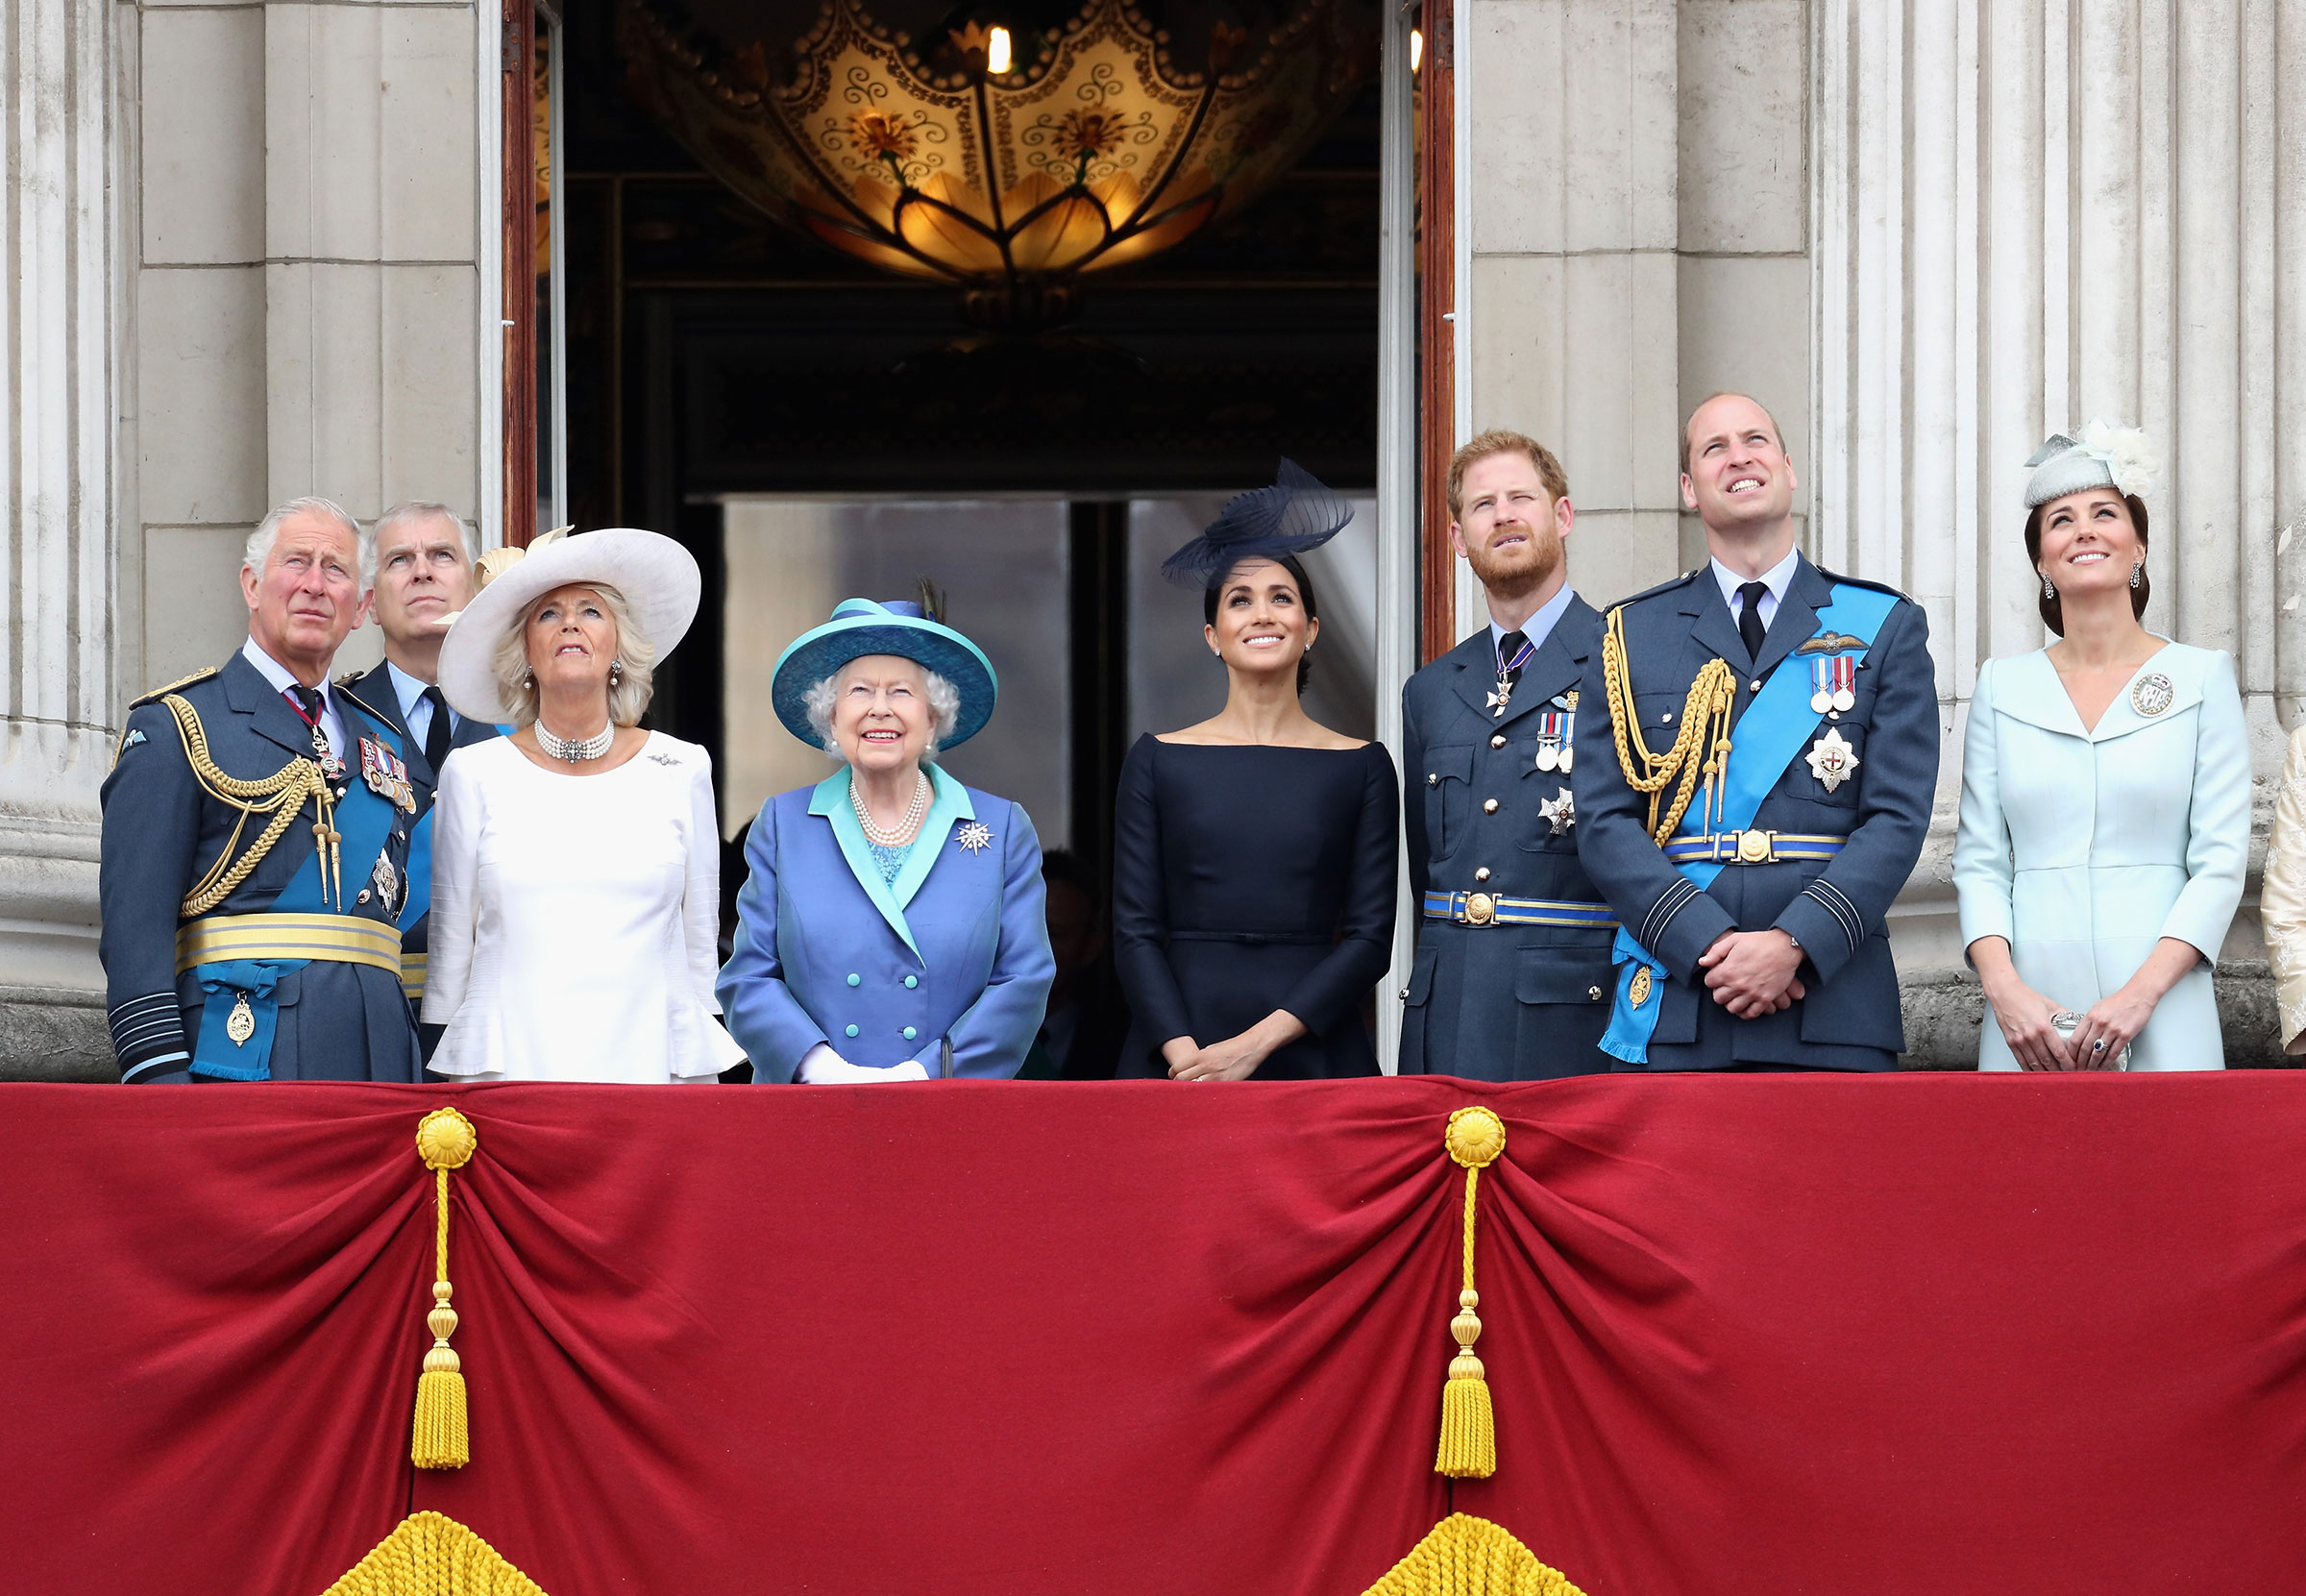 Prince Charles, Prince of Wales, Prince Andrew, Duke of York, Camilla, Duchess of Cornwall, Queen Elizabeth II, Meghan, Duchess of Sussex, Prince Harry, Duke of Sussex, Prince William, Duke of Cambridge and Catherine, Duchess of Cambridge watch the RAF flypast on the balcony of Buckingham Palace, as members of the Royal Family attend events to mark the centenary of the RAF on July 10, 2018. (Chris Jackson—Getty Images)